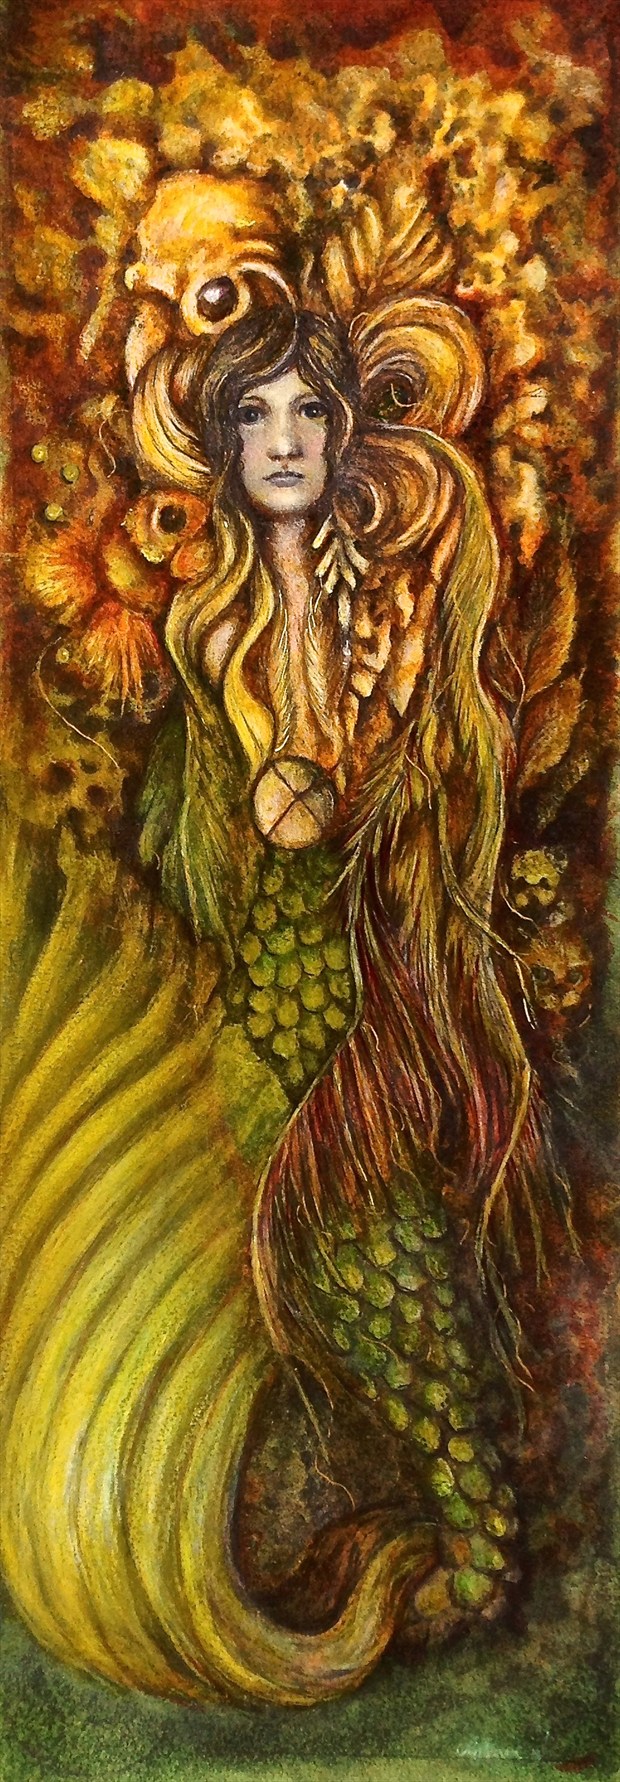 Mermaid Who Could Fly Surreal Artwork by Artist Lalena Lamson